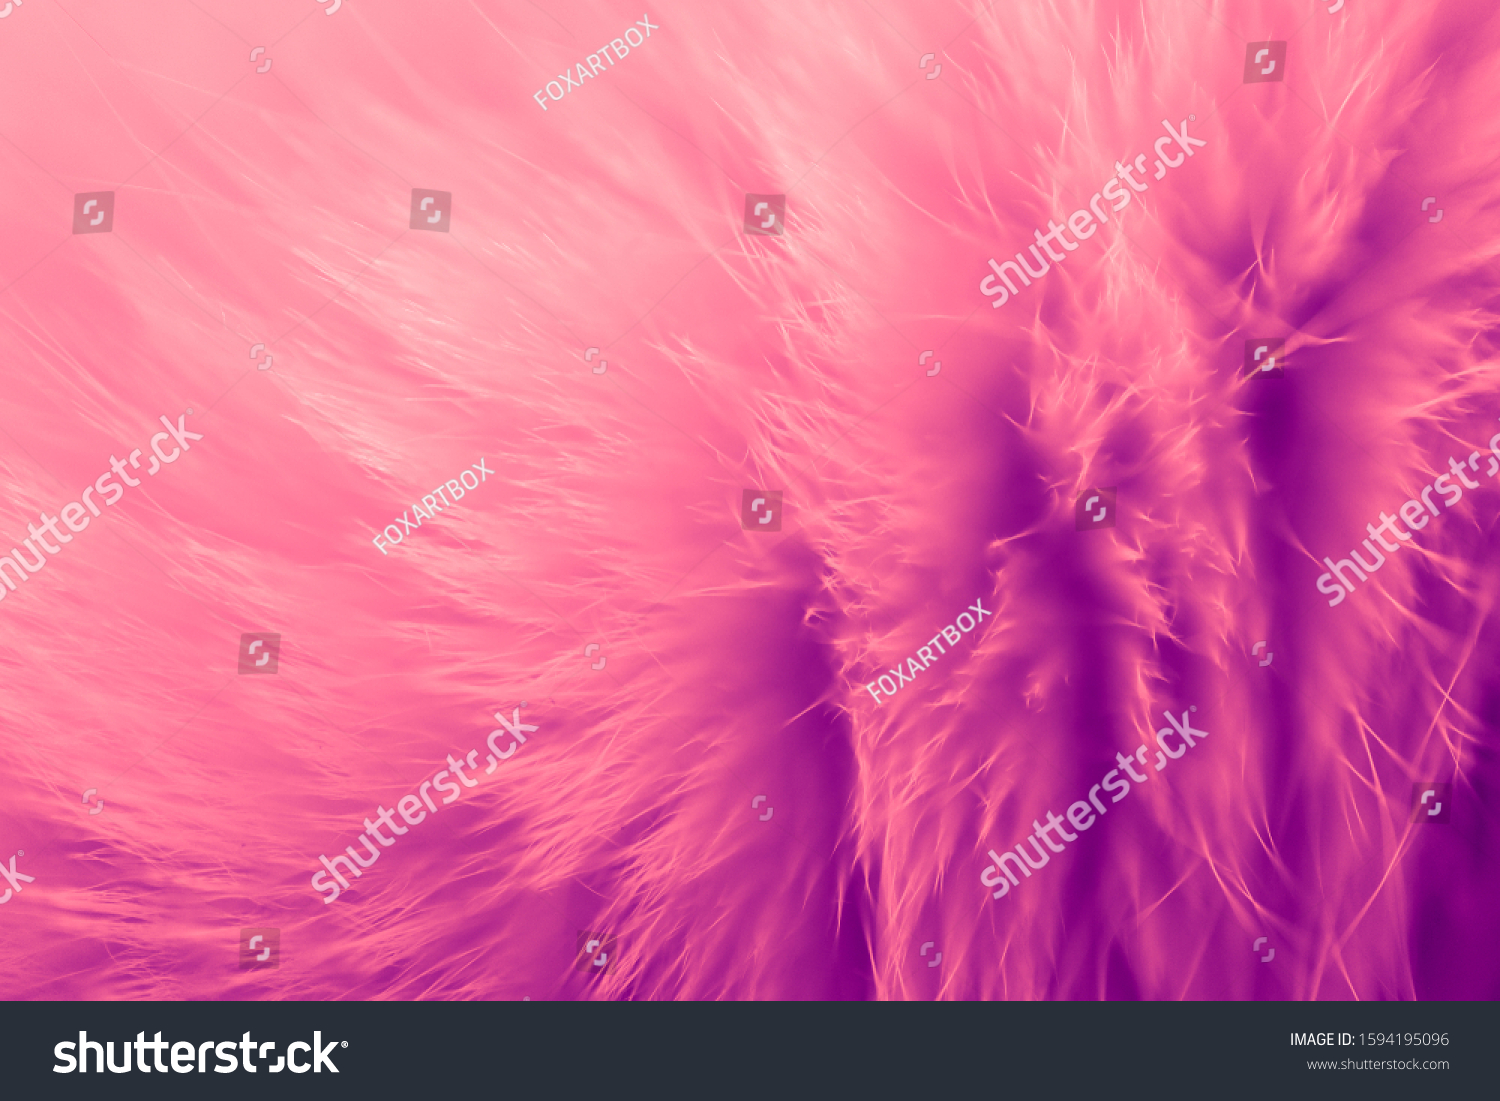 Delicate abstract fluffy background. Glamours pink fur backdrop. #1594195096